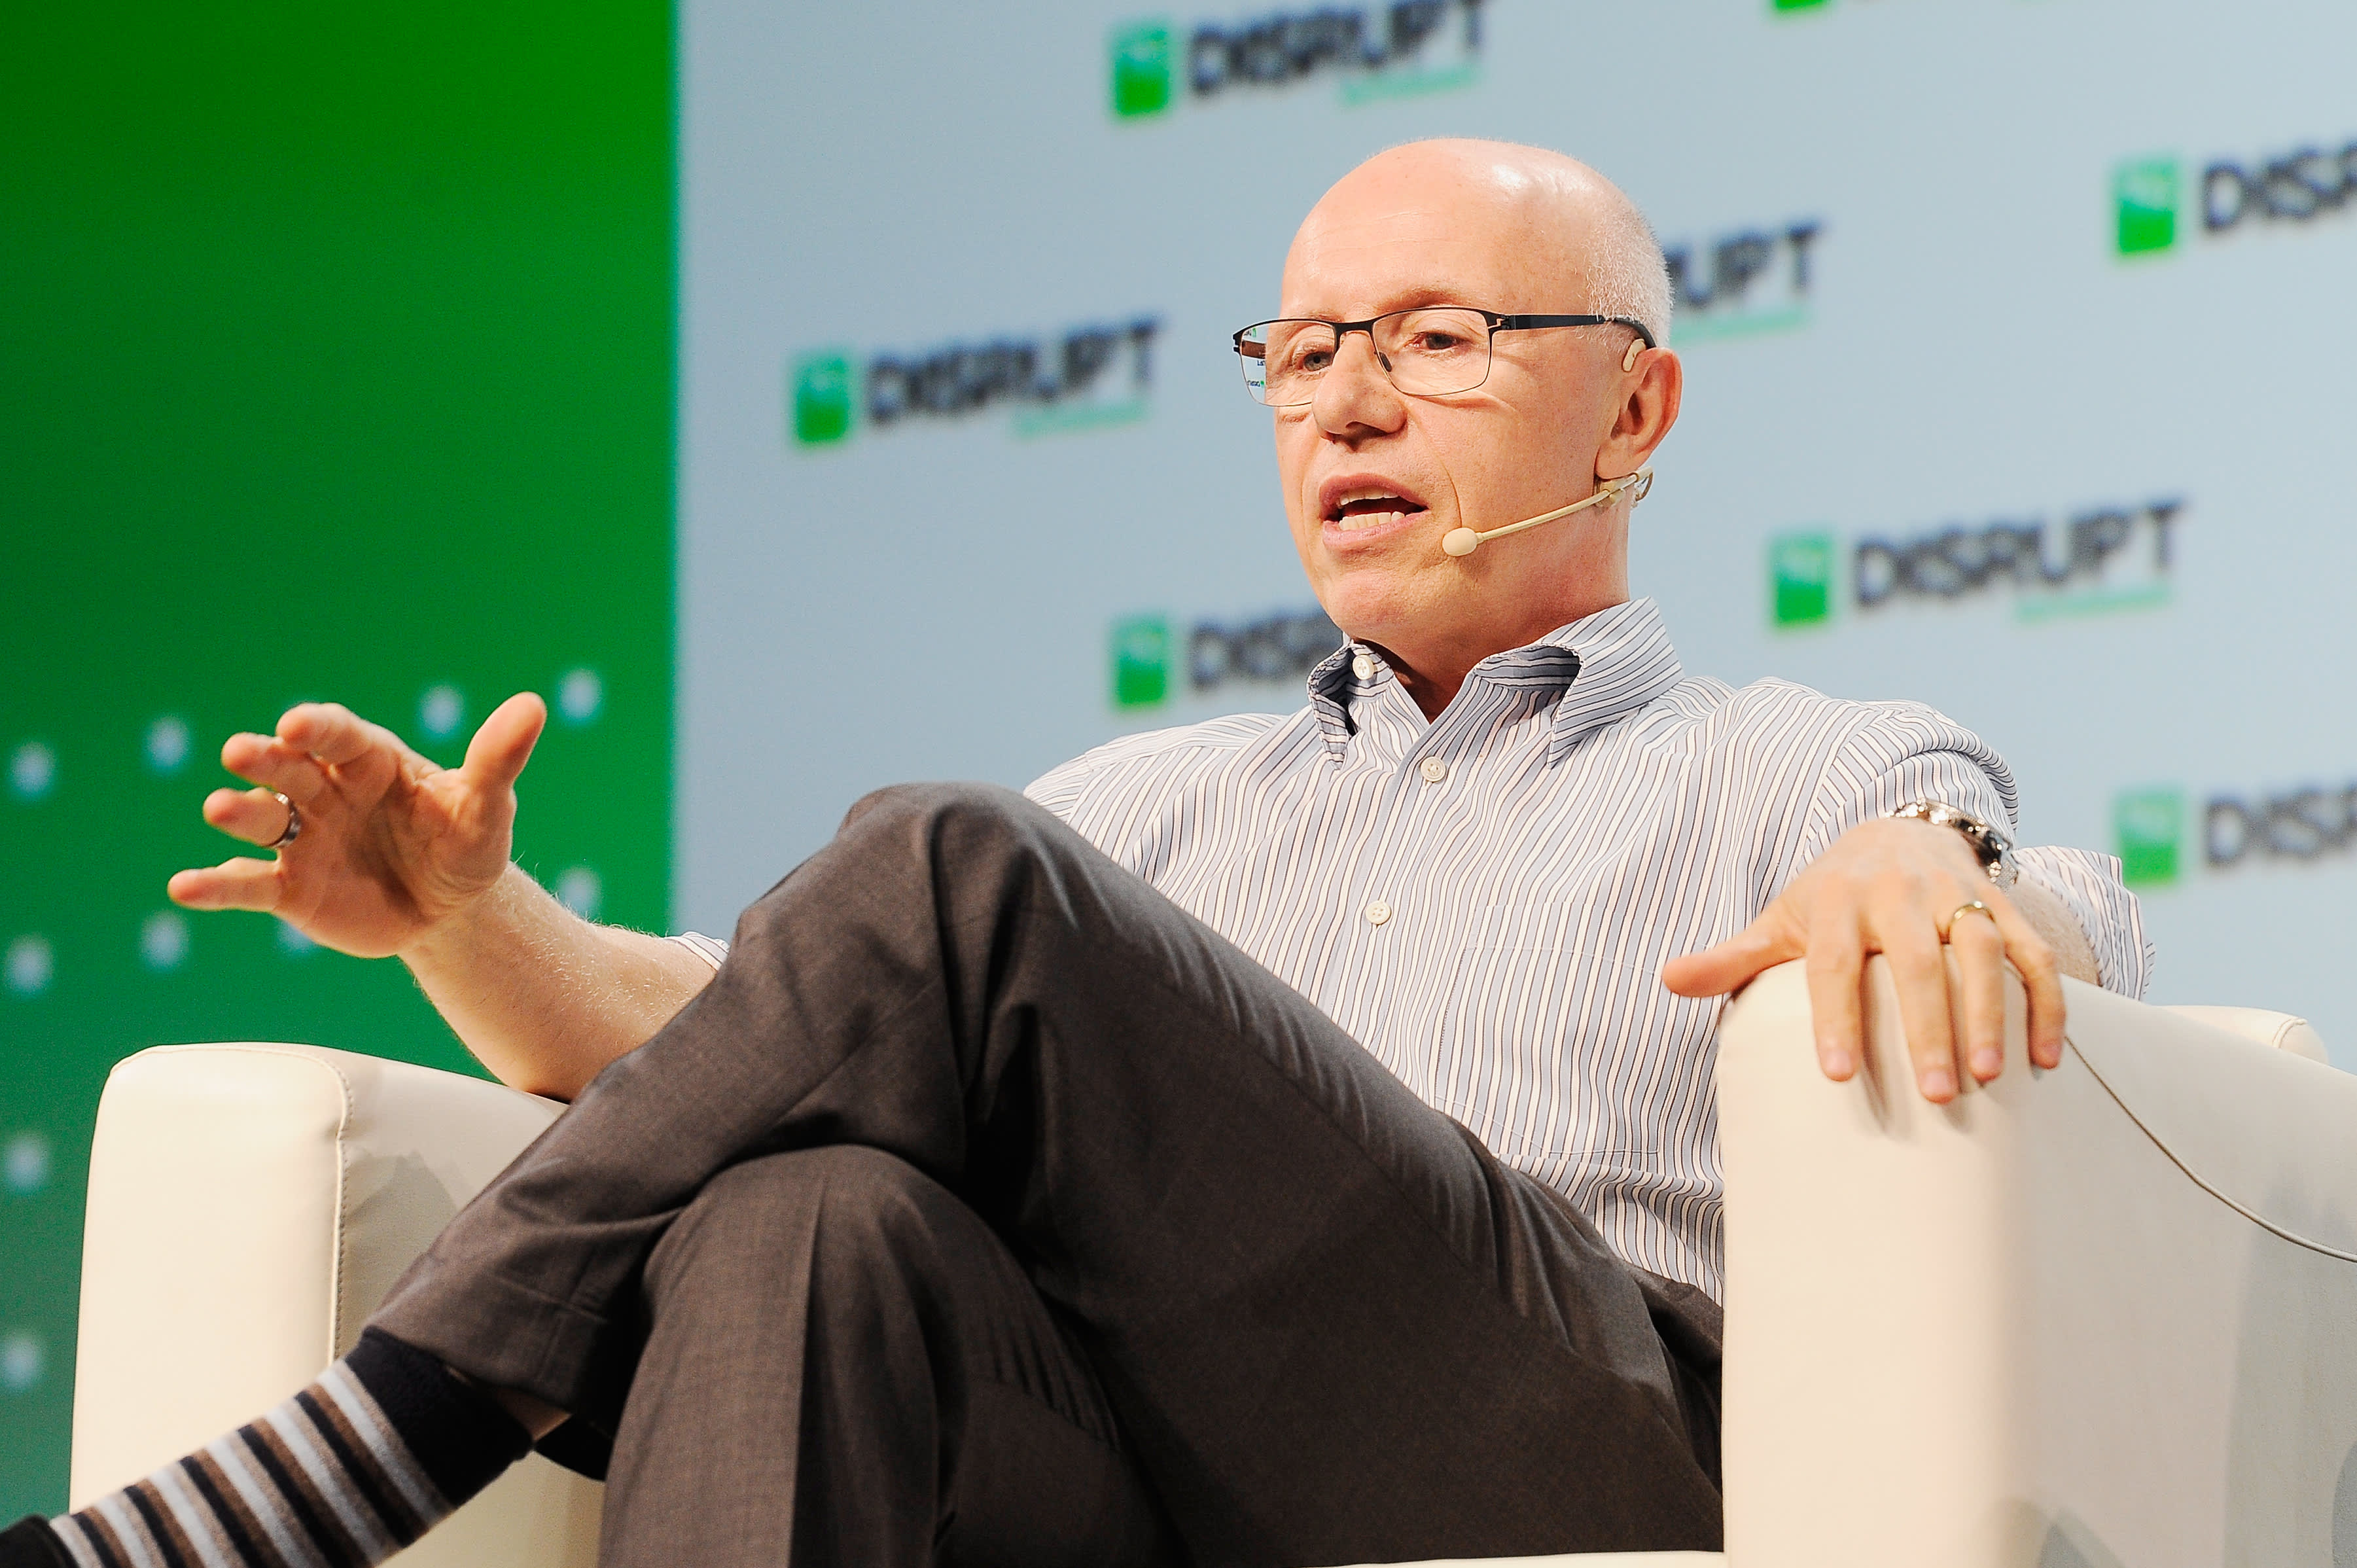 Iconic VC firm Sequoia is breaking from the venture capital model to hold public stocks longer